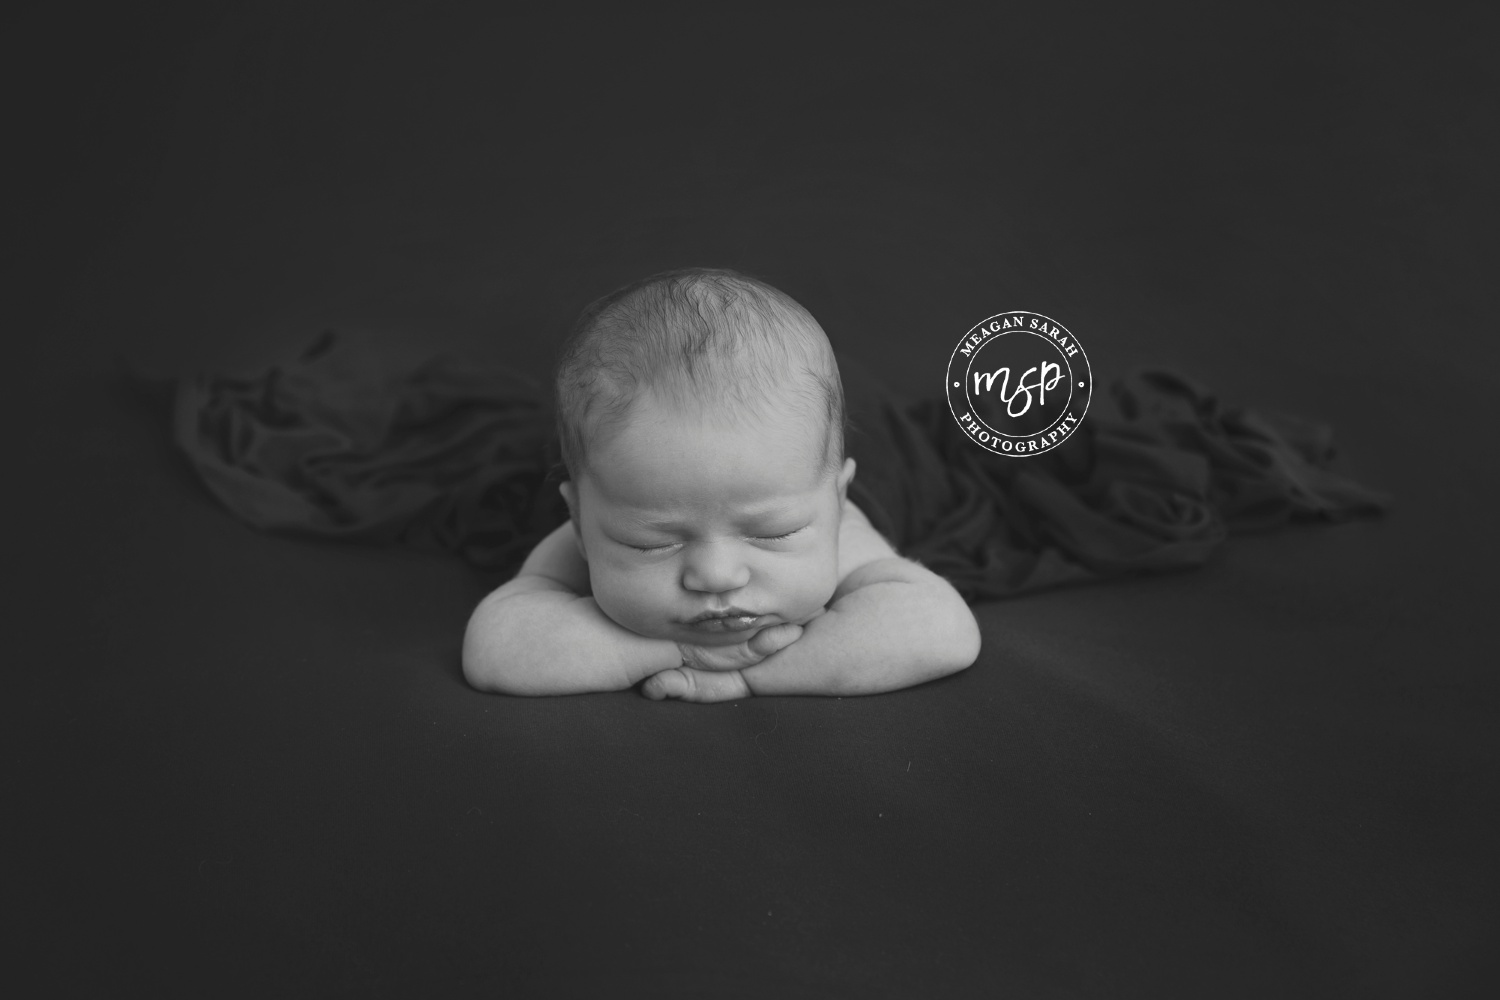 Black and White,West Yorkshire Photographer,Professional Photographer in Leeds,Meagan Sarah Photography,Leeds Photographer,Horsforth Photographer,Horsforth Leeds Photographer,PHOTOGRAPHER,Katie Louise Williams,Meagan Sarah Pope,Sex of Baby,Girl,Horsforth Newborn Photography,Leeds Baby Photographer,Leeds Newborn Photographer,Newborn Babies,Newborn Photographer,Newborn Photography,Photos of Babies,Photos of Newborns,Yorkshire Newborn Photographer,Yorkshire Newborn Photography,